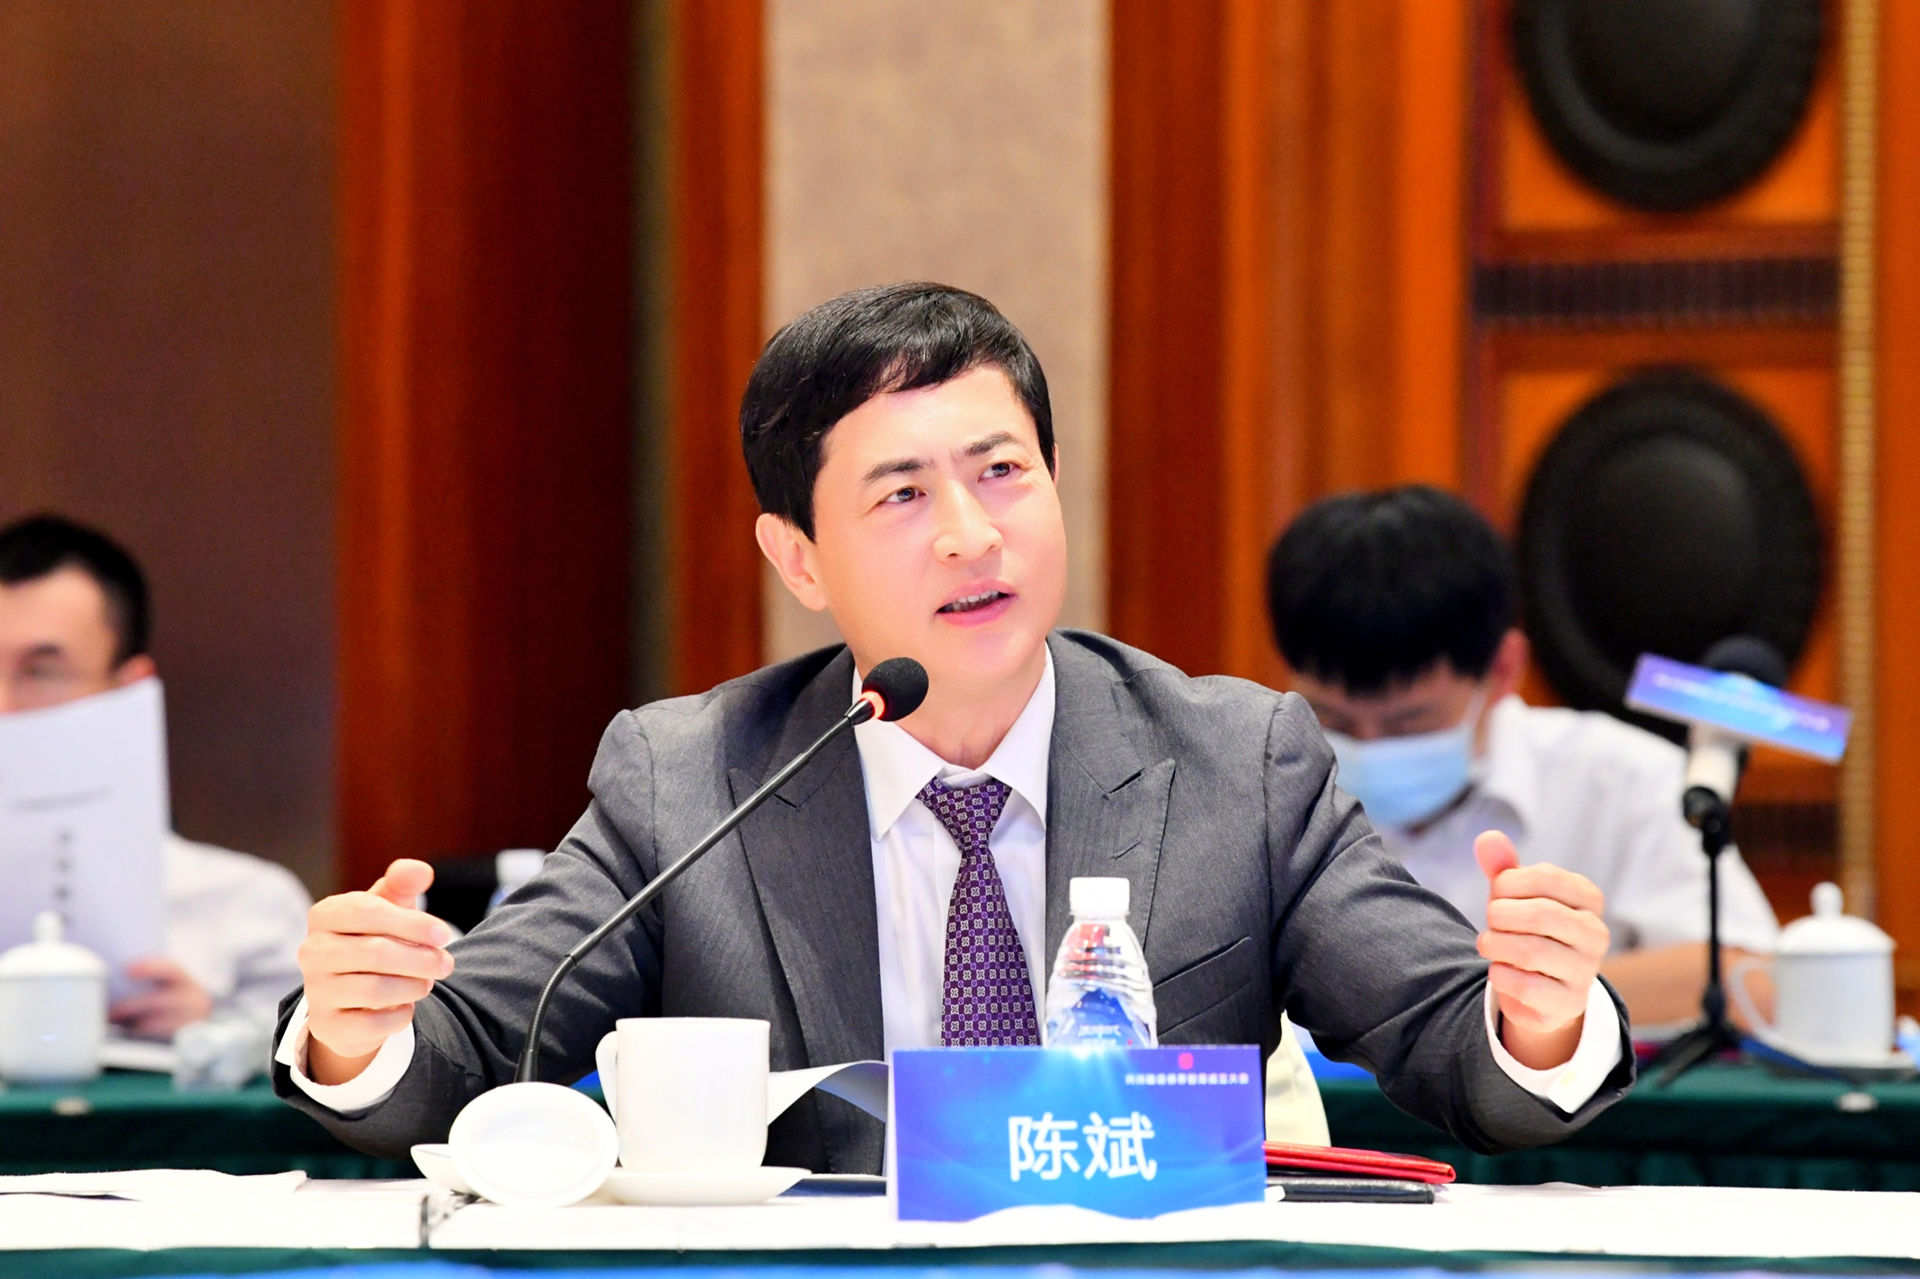 On 23 June, 2022, Dr. Chen Bin, President of the Group, was invited to attend the Inaugural Meeting of “Overseas Chinese Think Tank for Flourishing Sichuan & Assisting Chongqing”.